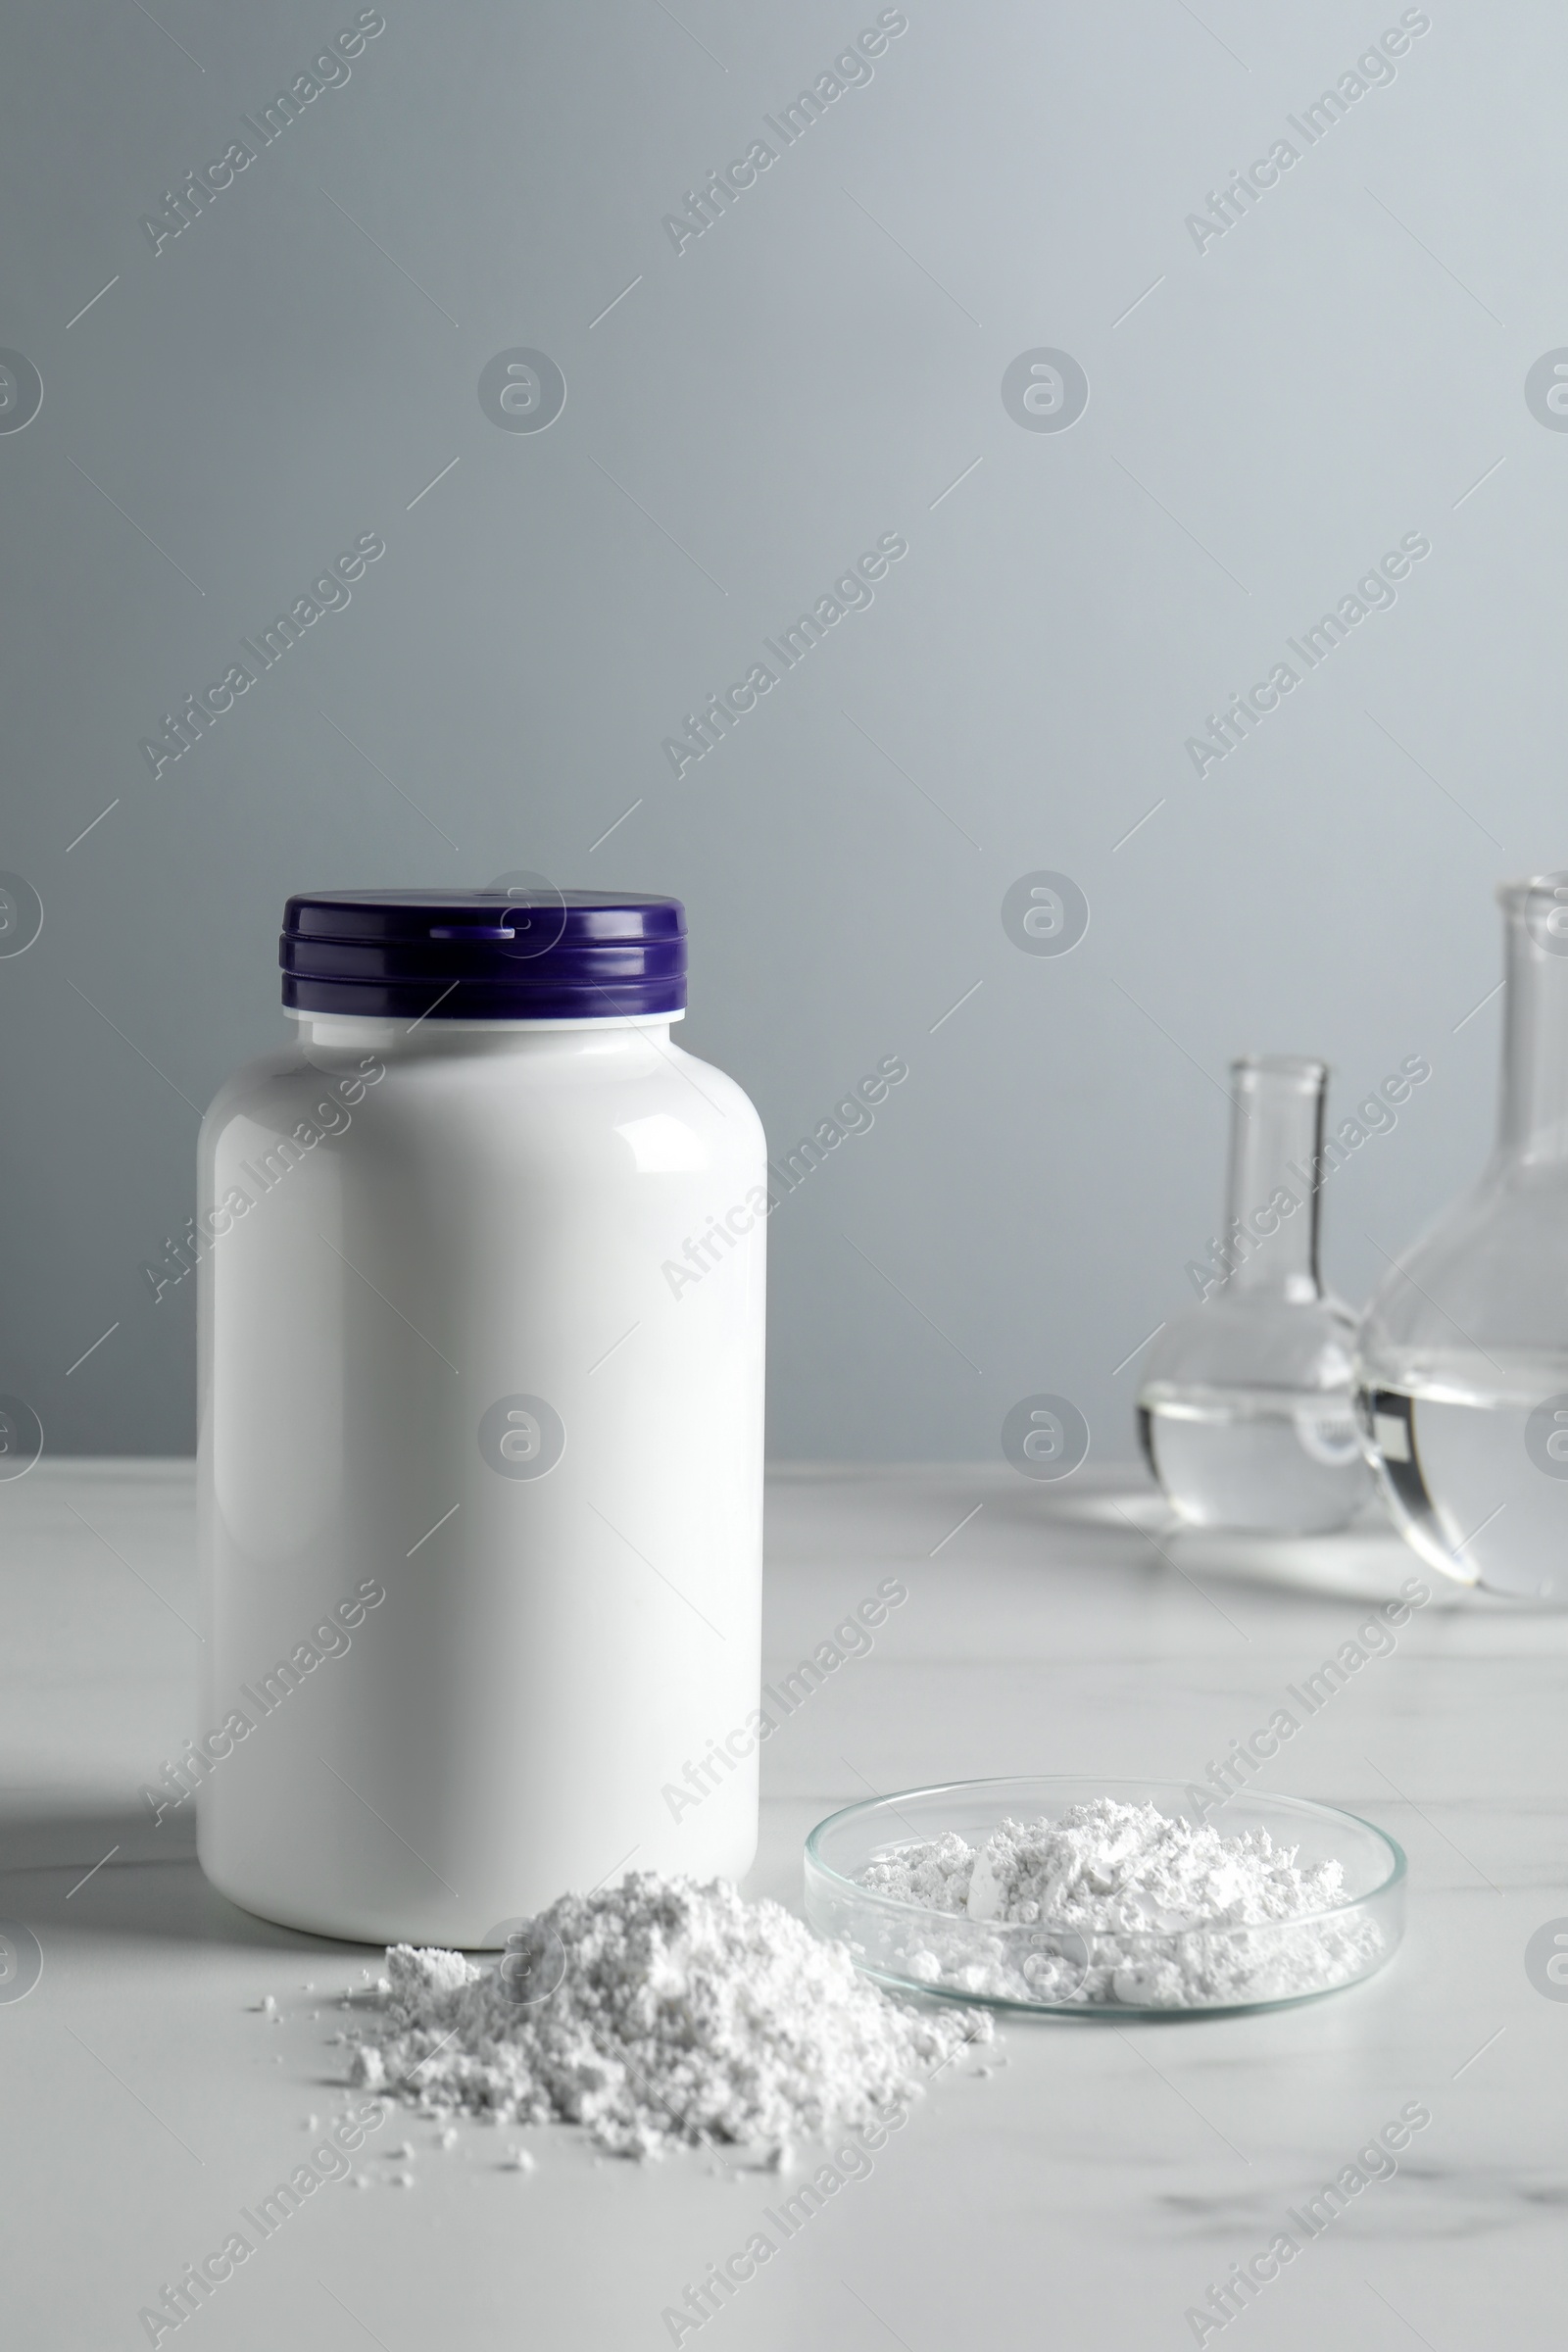 Photo of Calcium carbonate powder, jar and laboratory glassware on white marble table